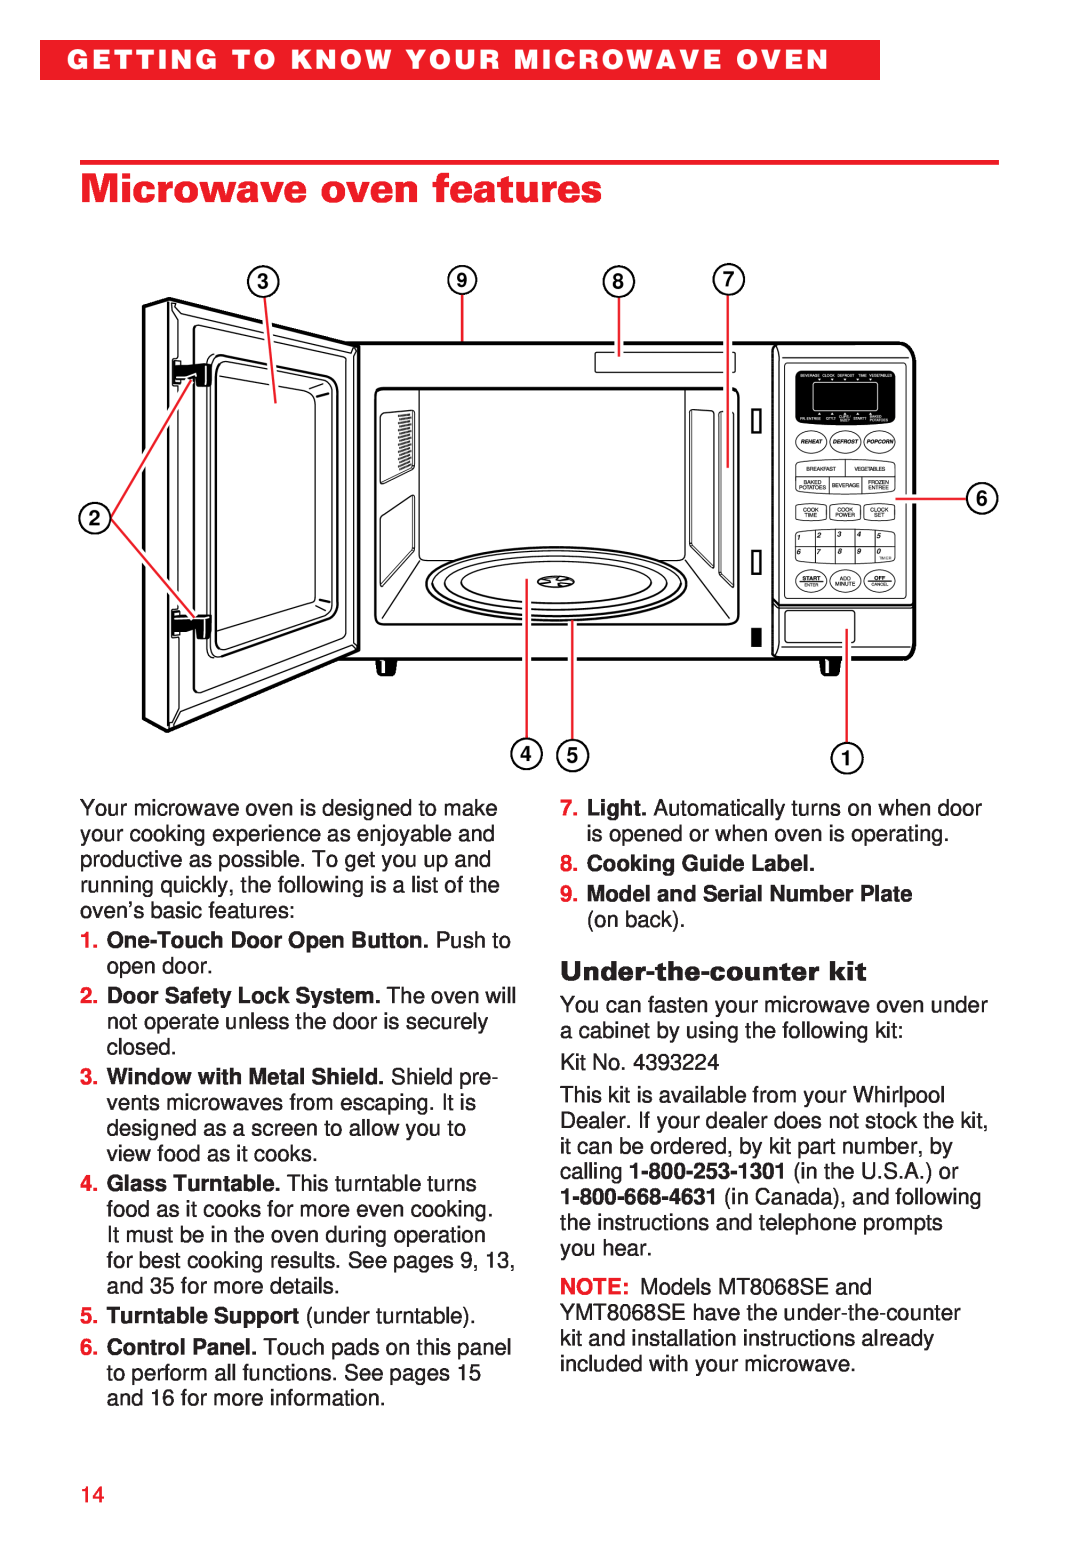 Whirlpool YMT8066SE Microwave oven features, Under-the-counter kit, One-Touch Door Open Button. Push to open door 